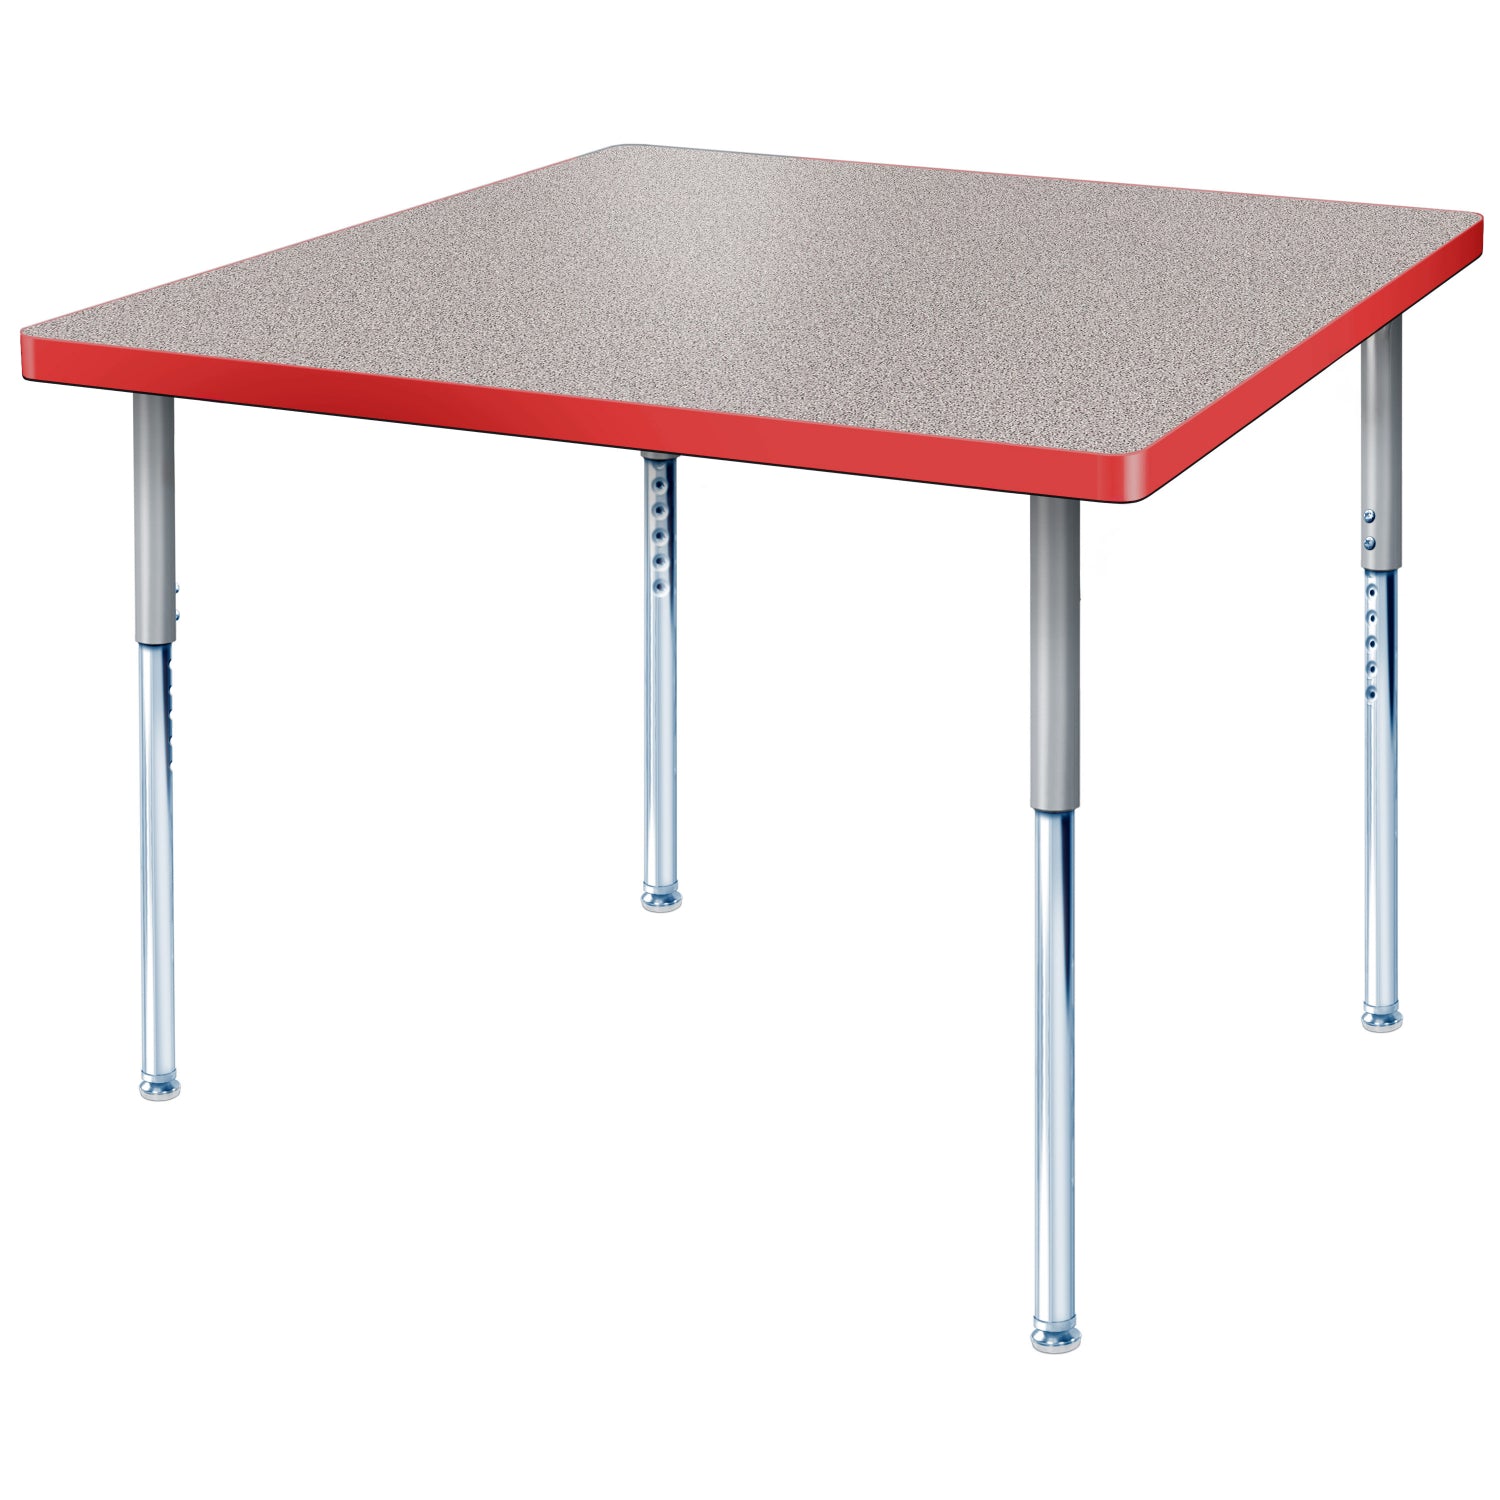 Modern Classic Series 36 x 36" Square Activity Table with High Pressure Laminate Top, Adjustable Height Legs